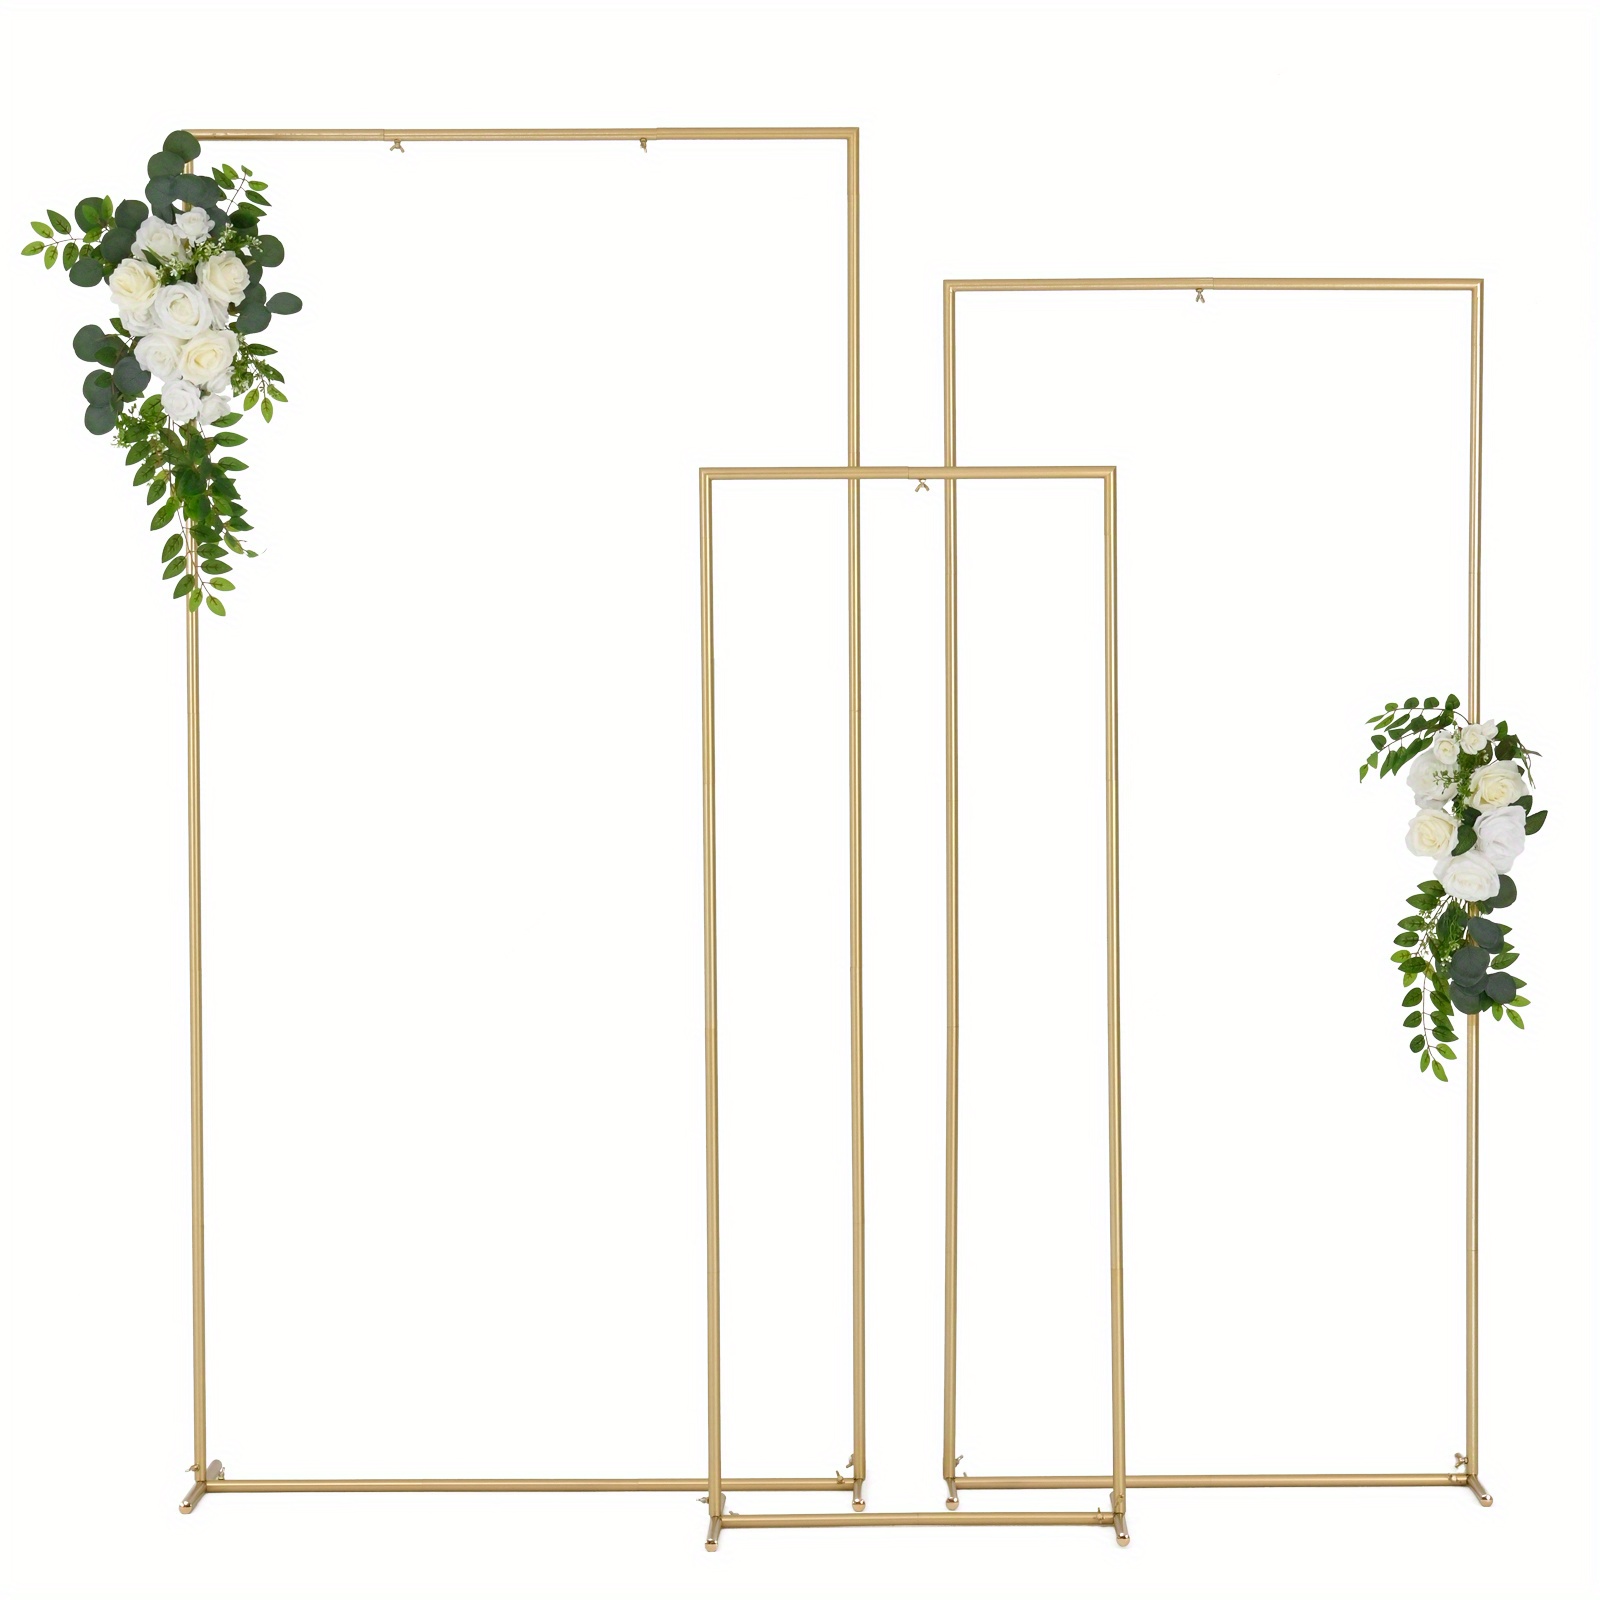 

Set Of 3 Square Wedding Arch Backdrop Stand, Balloon Arch Stand, Metal Arch Backdrop For Birthday Party Wedding Ceremony Graduation Anniversary Gold (6.6ft, 5.9ft, 4.9ft)